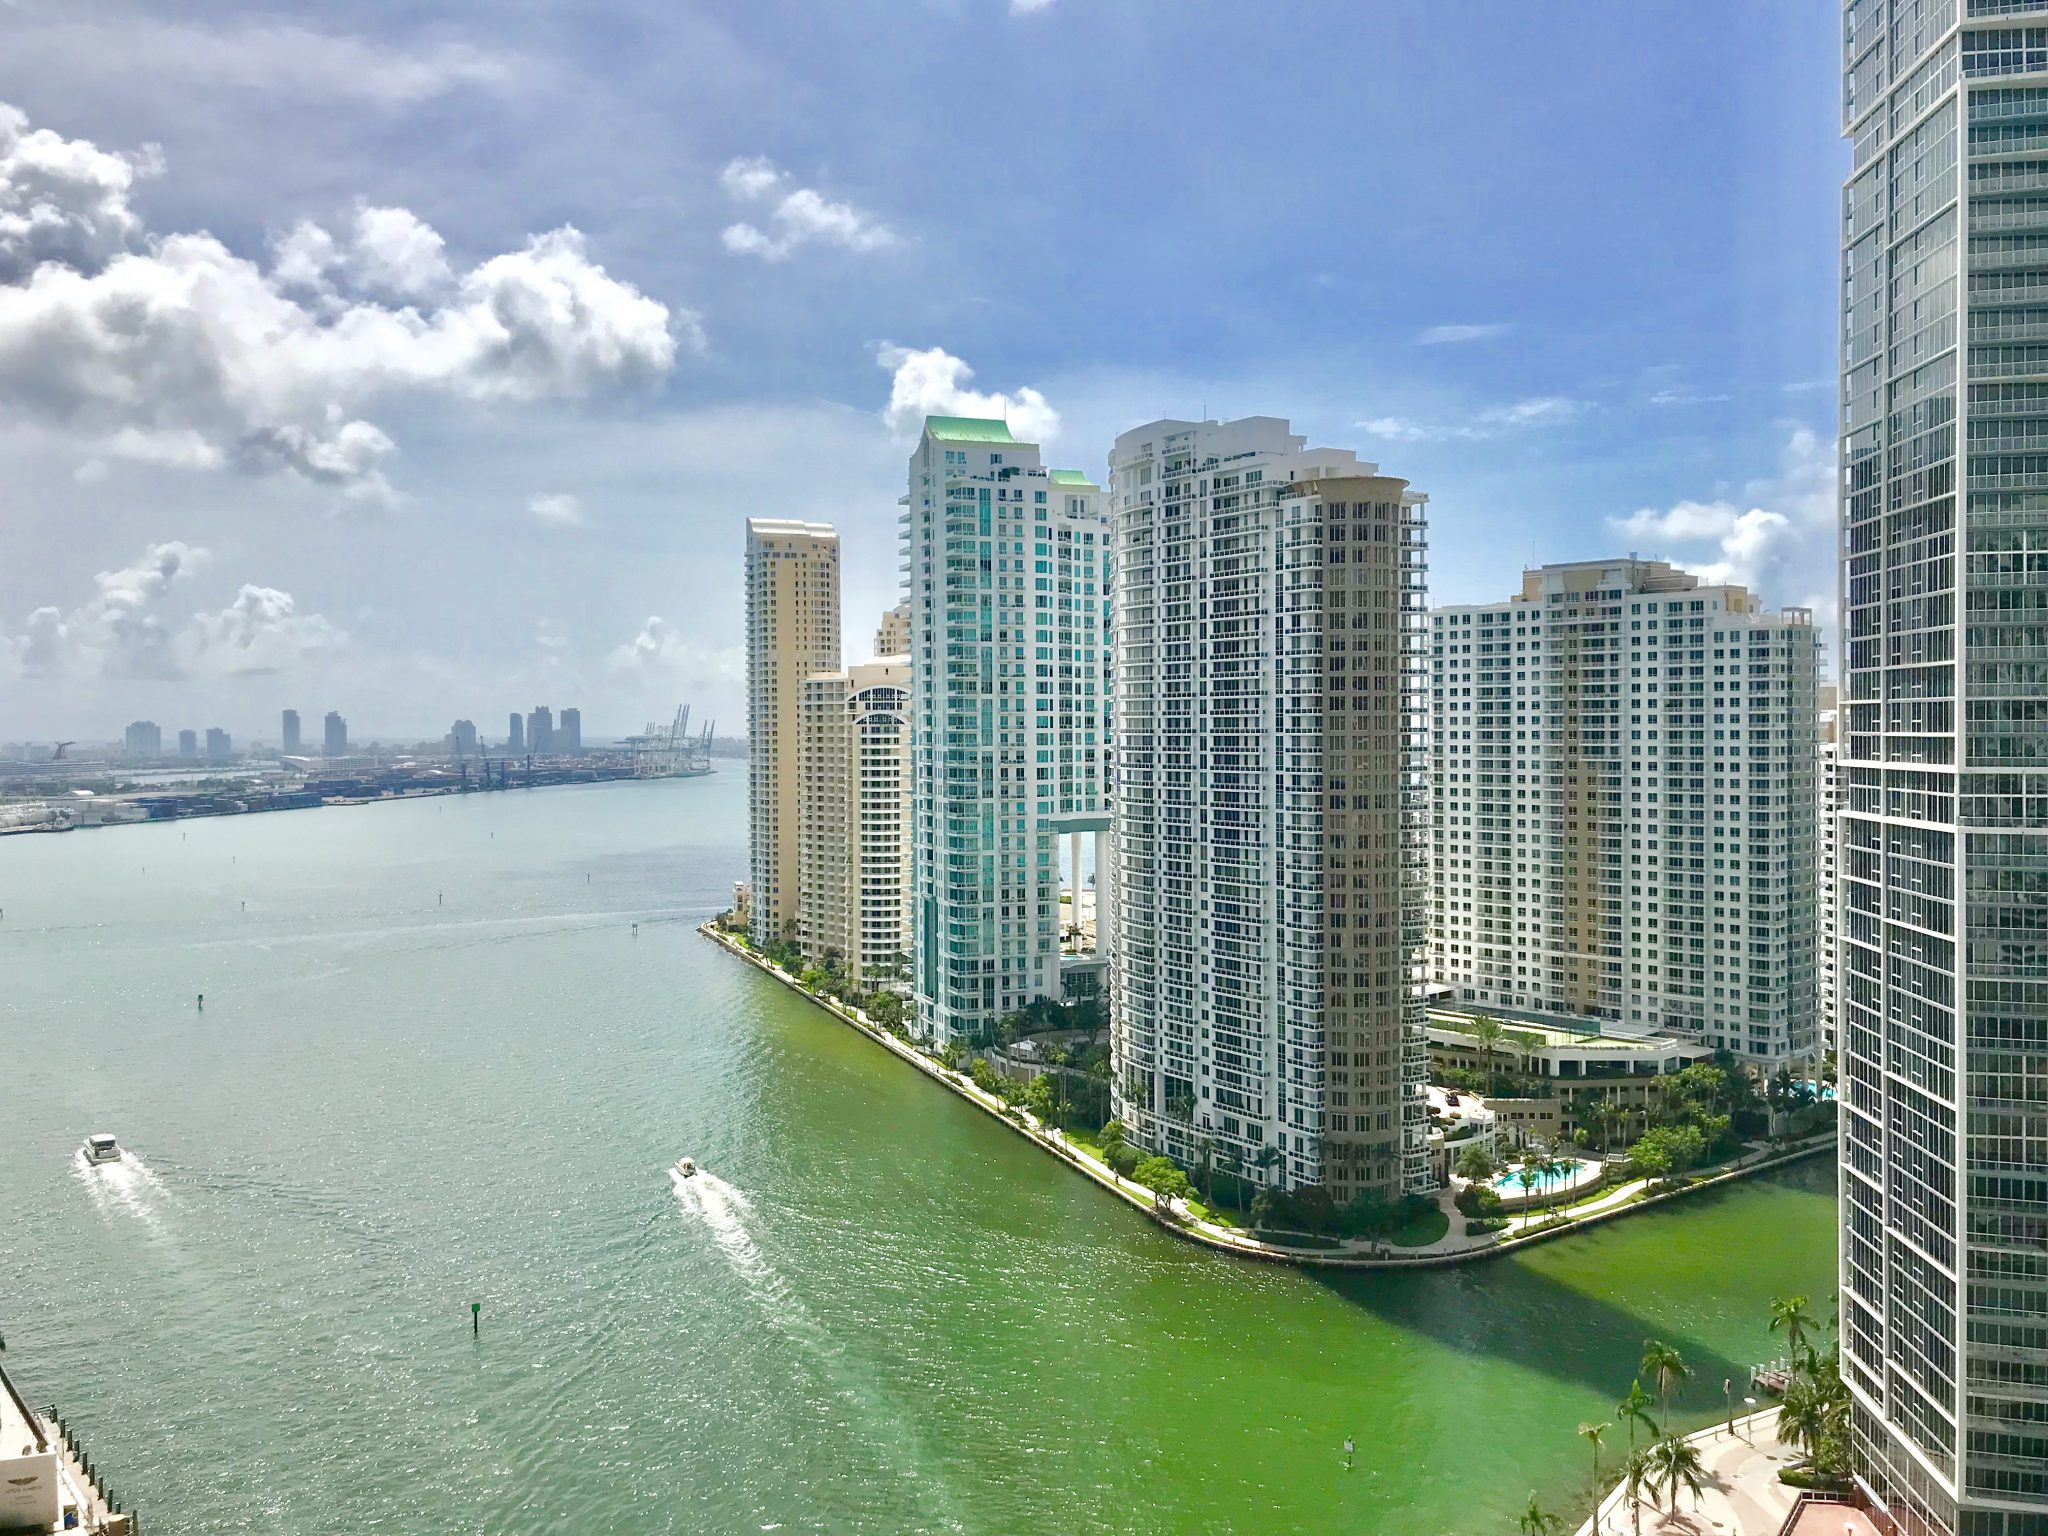 View of Miami River and Brickell Key from the Epic Hotel